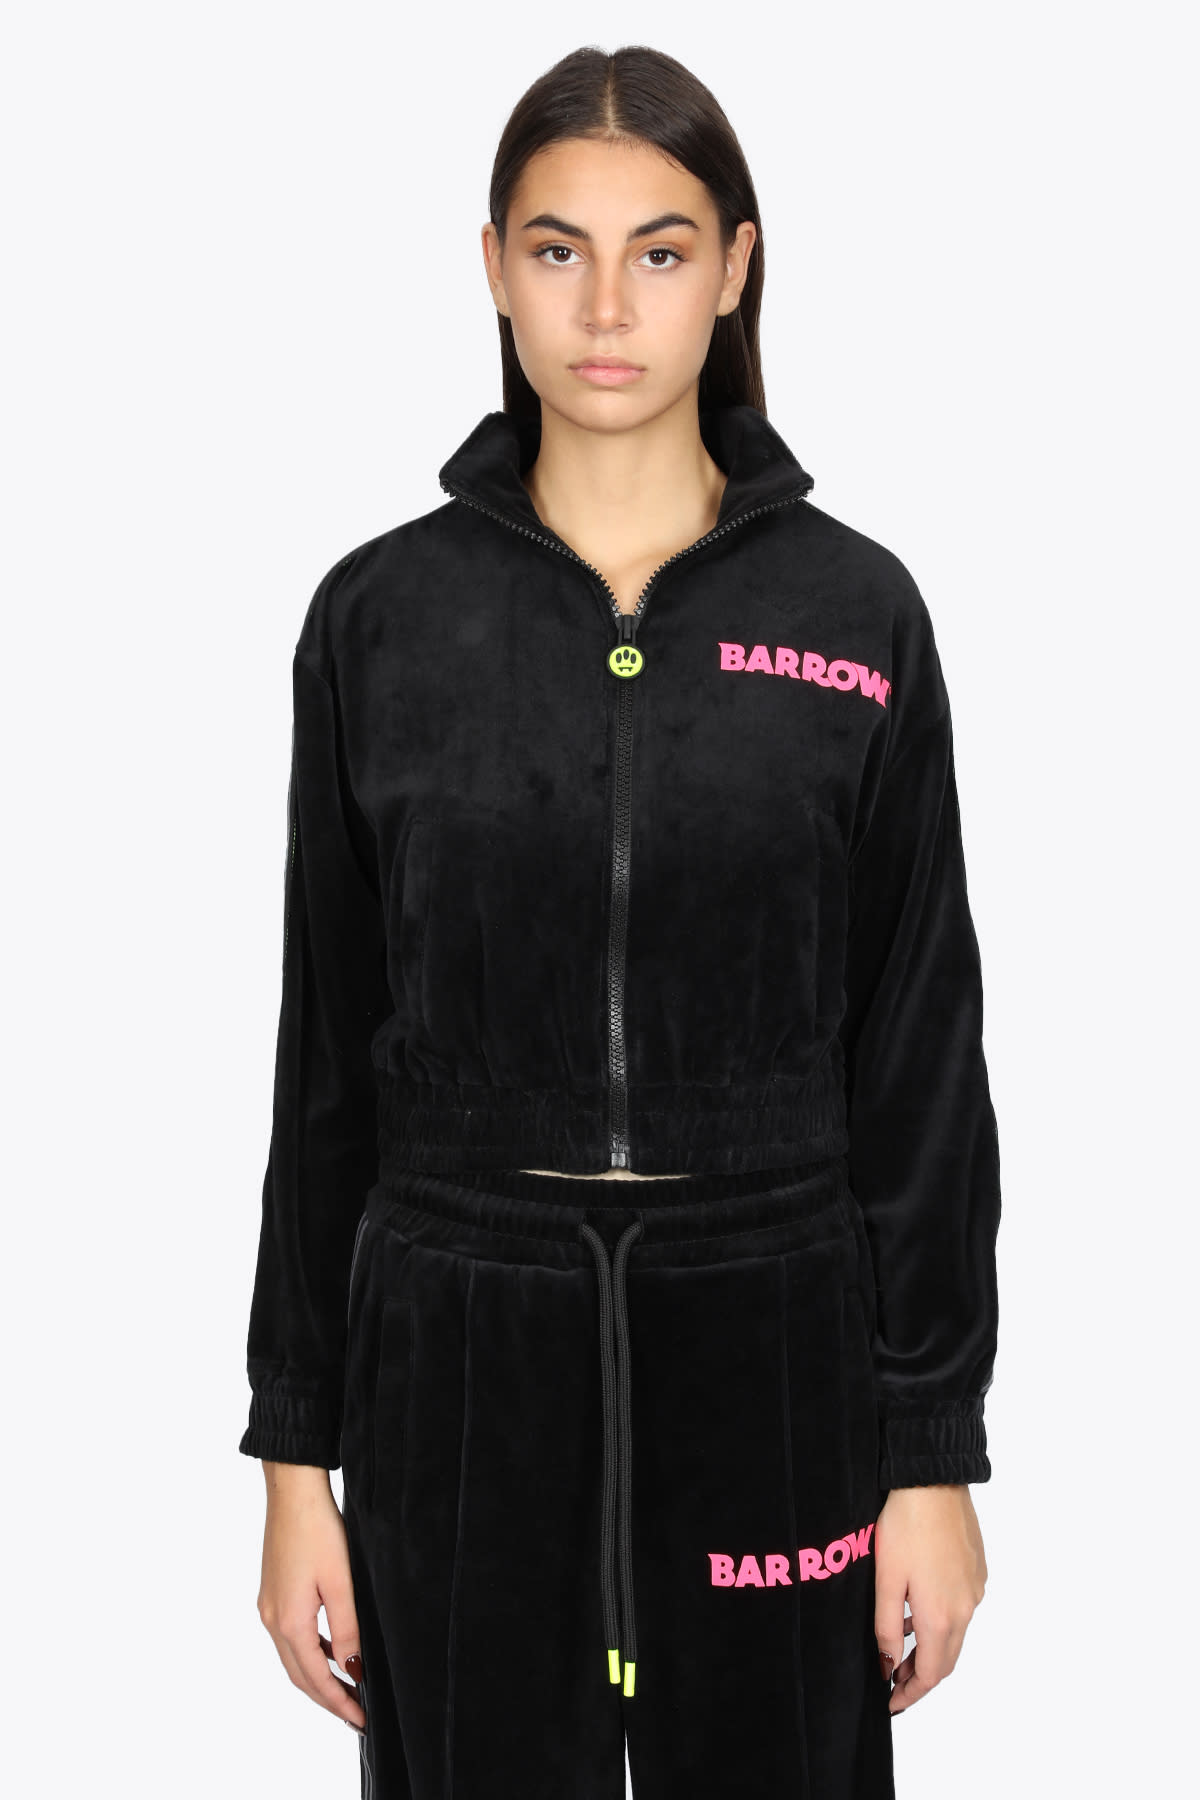 Barrow Terry Cloth Jacket Black chenille tracksuit jacket with side tape